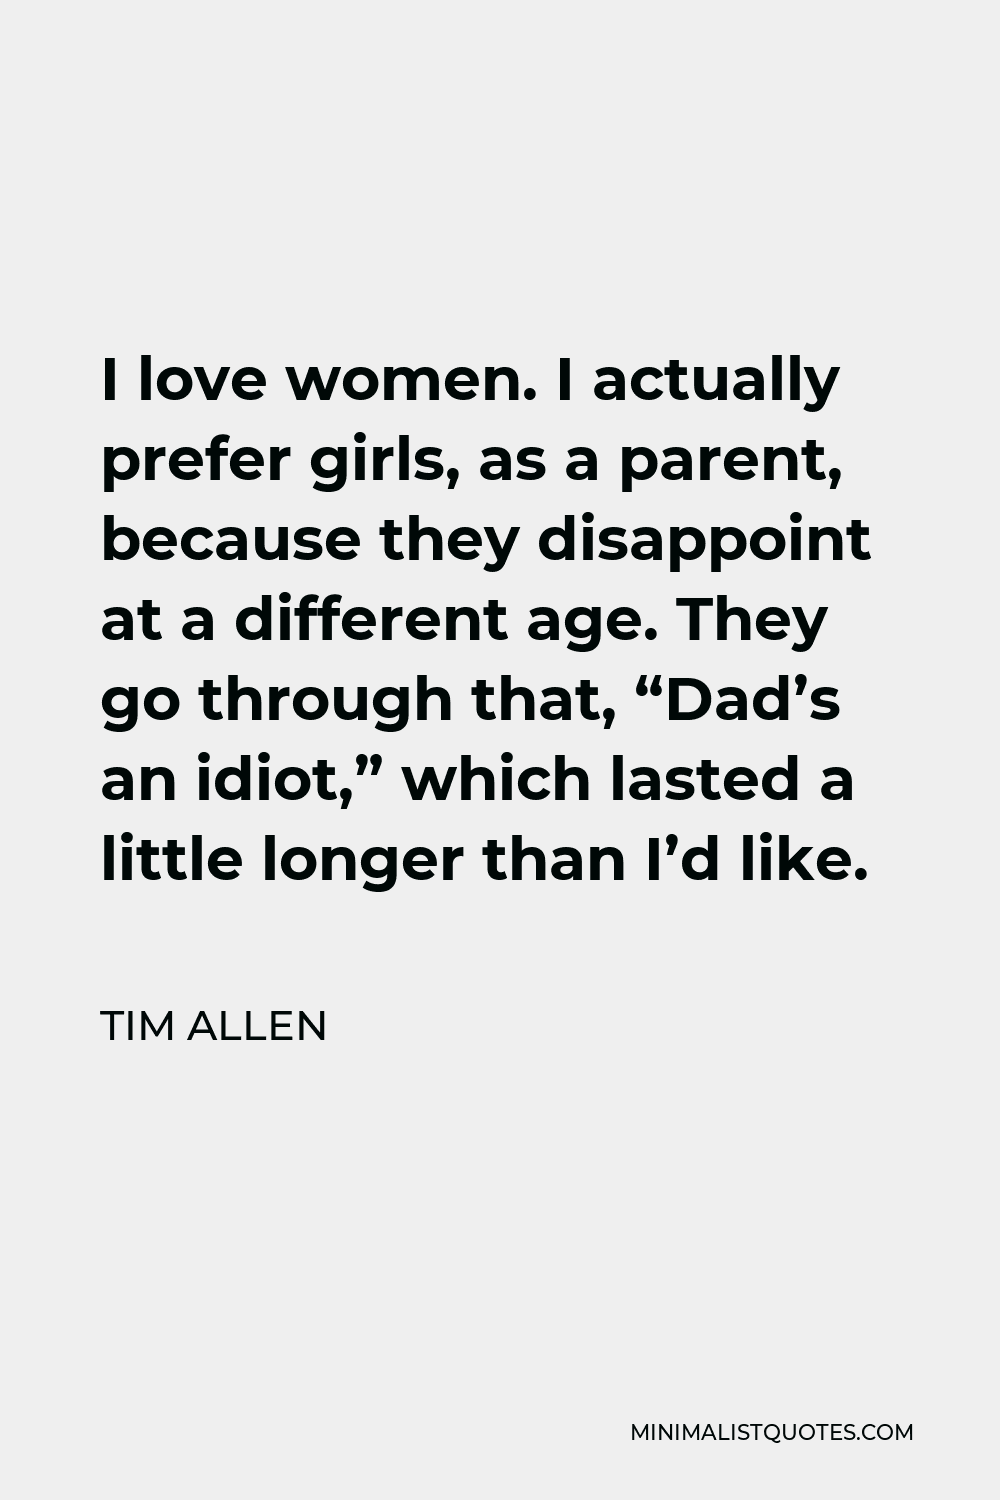 Tim Allen Quote - I love women. I actually prefer girls, as a parent, because they disappoint at a different age. They go through that, “Dad’s an idiot,” which lasted a little longer than I’d like.